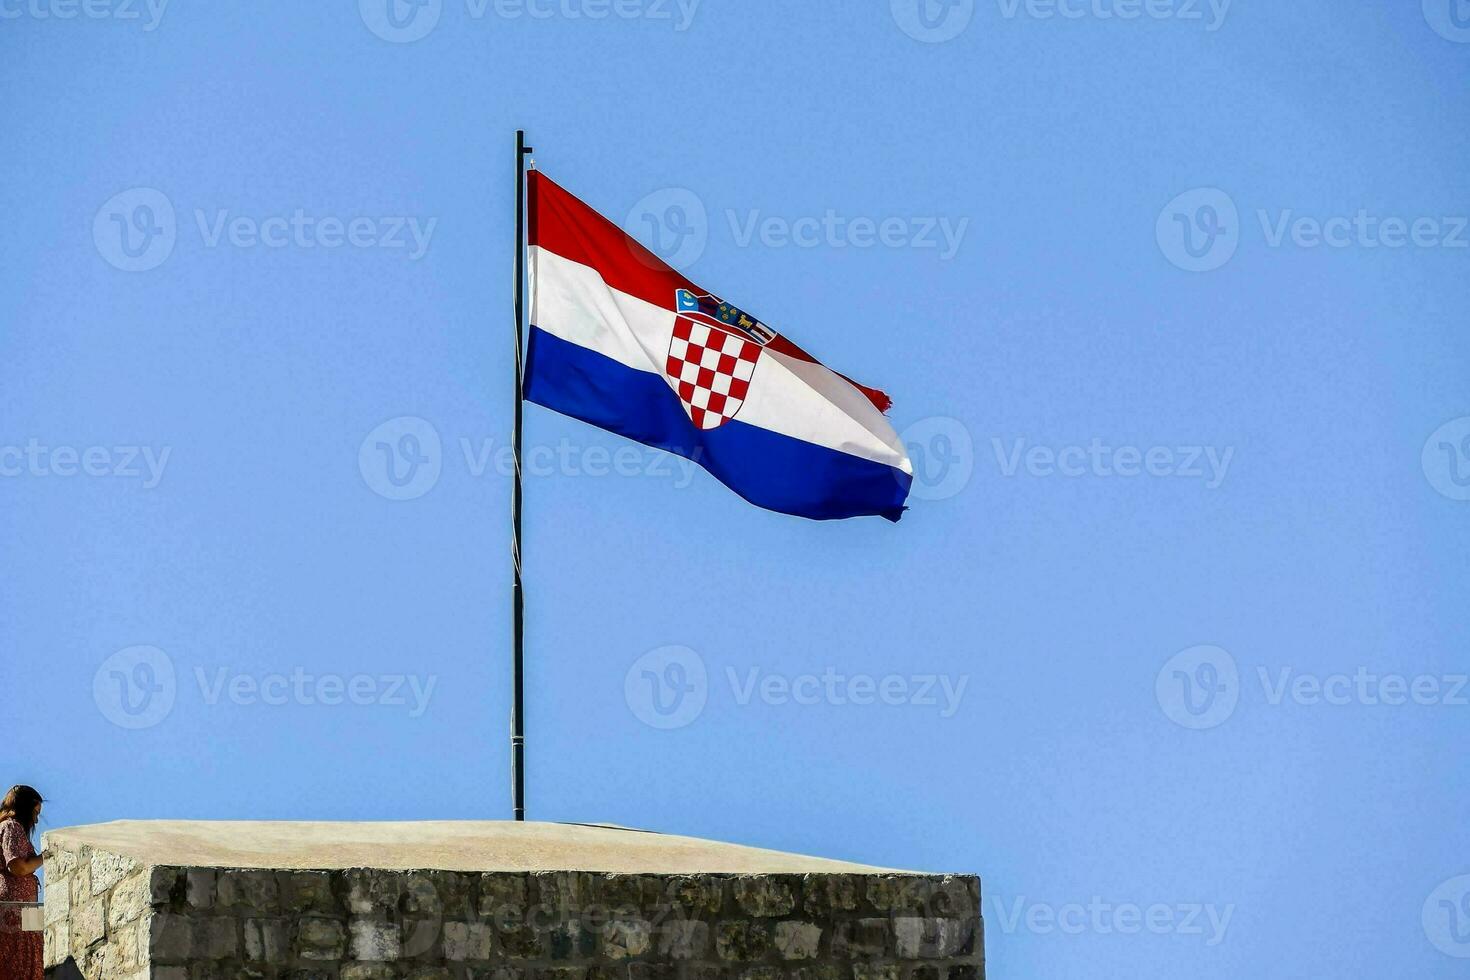 the croatian flag flying high in the sky photo